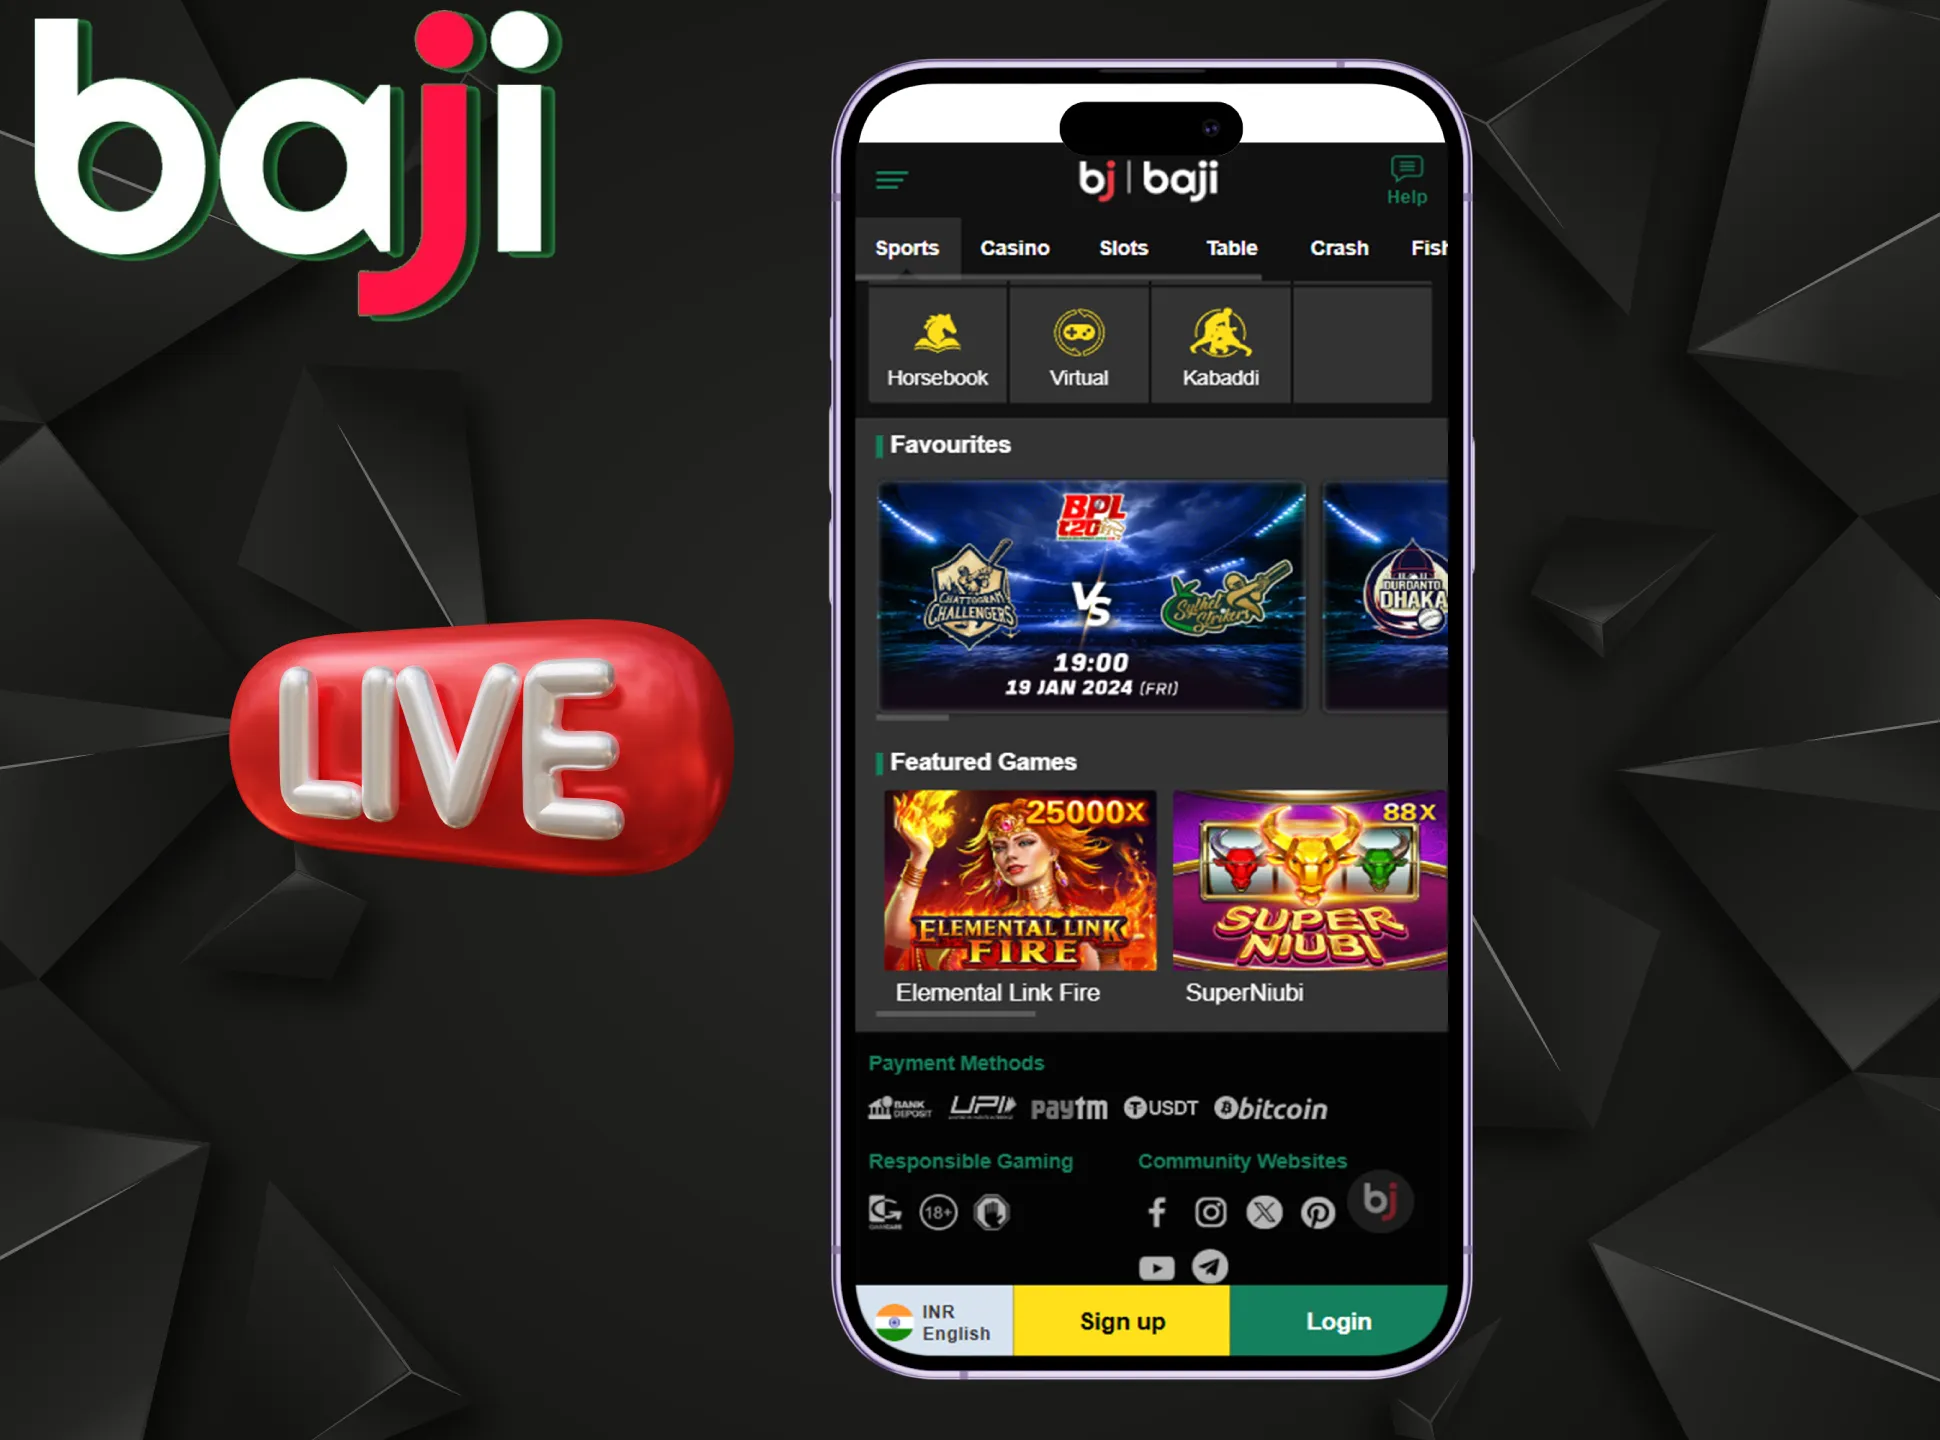 The Baji app has all the necessary features for convenient betting.